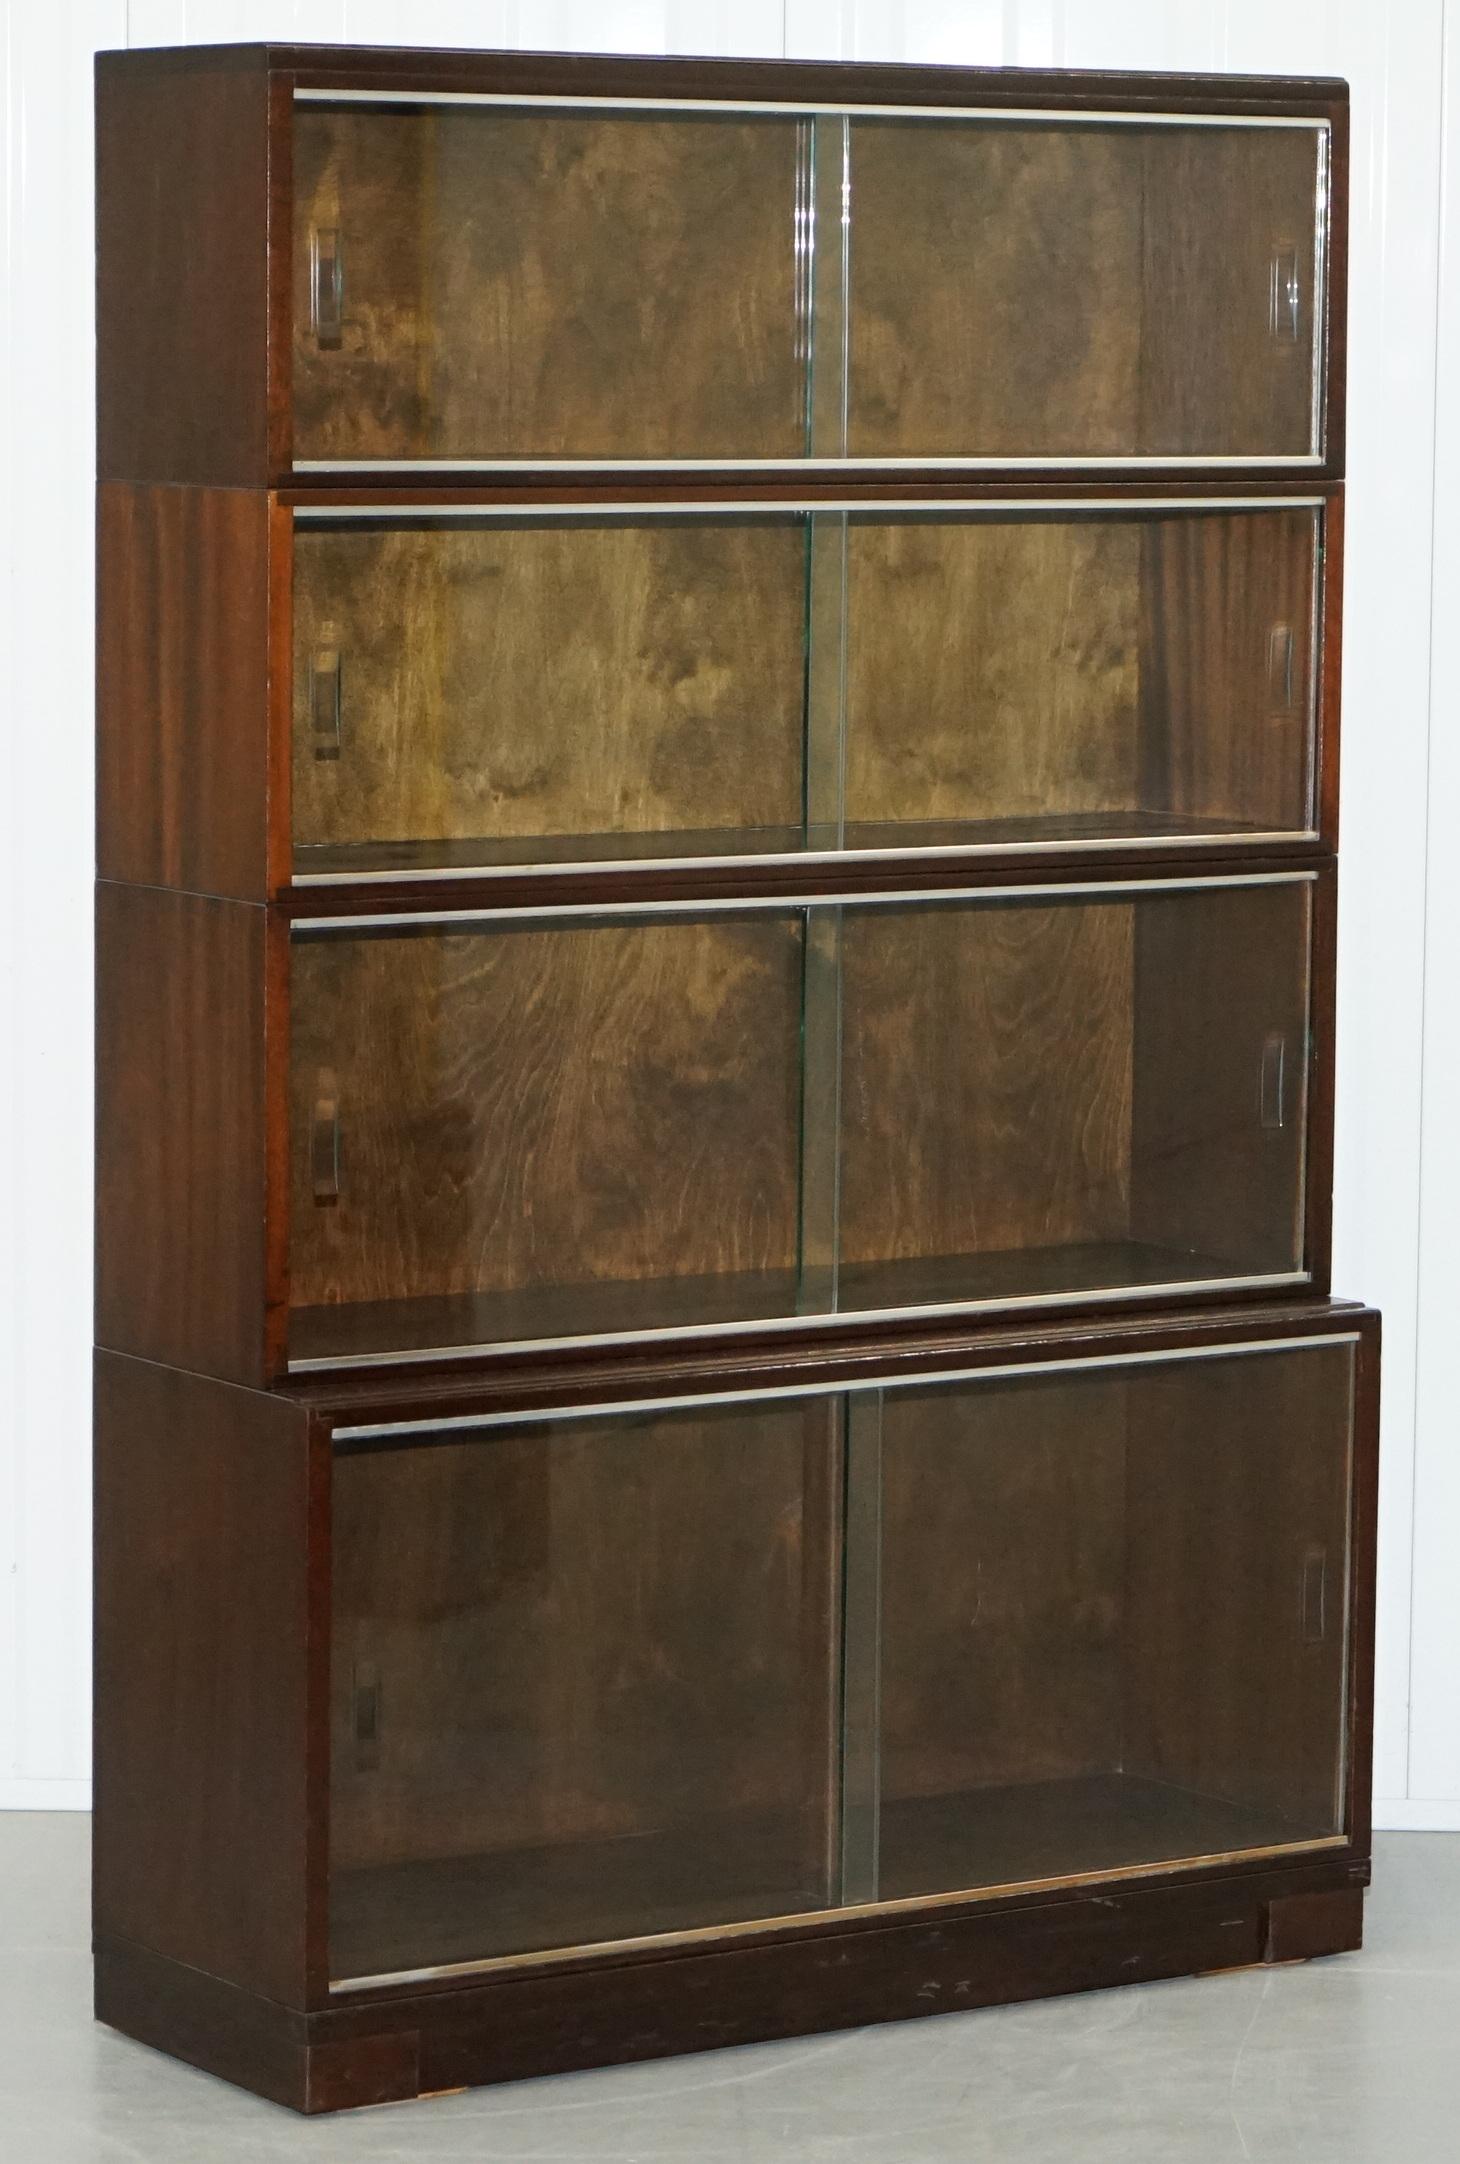 Legal Library Suite of Minty Oxford Modular Stacking Mahogany Library Bookcases 2